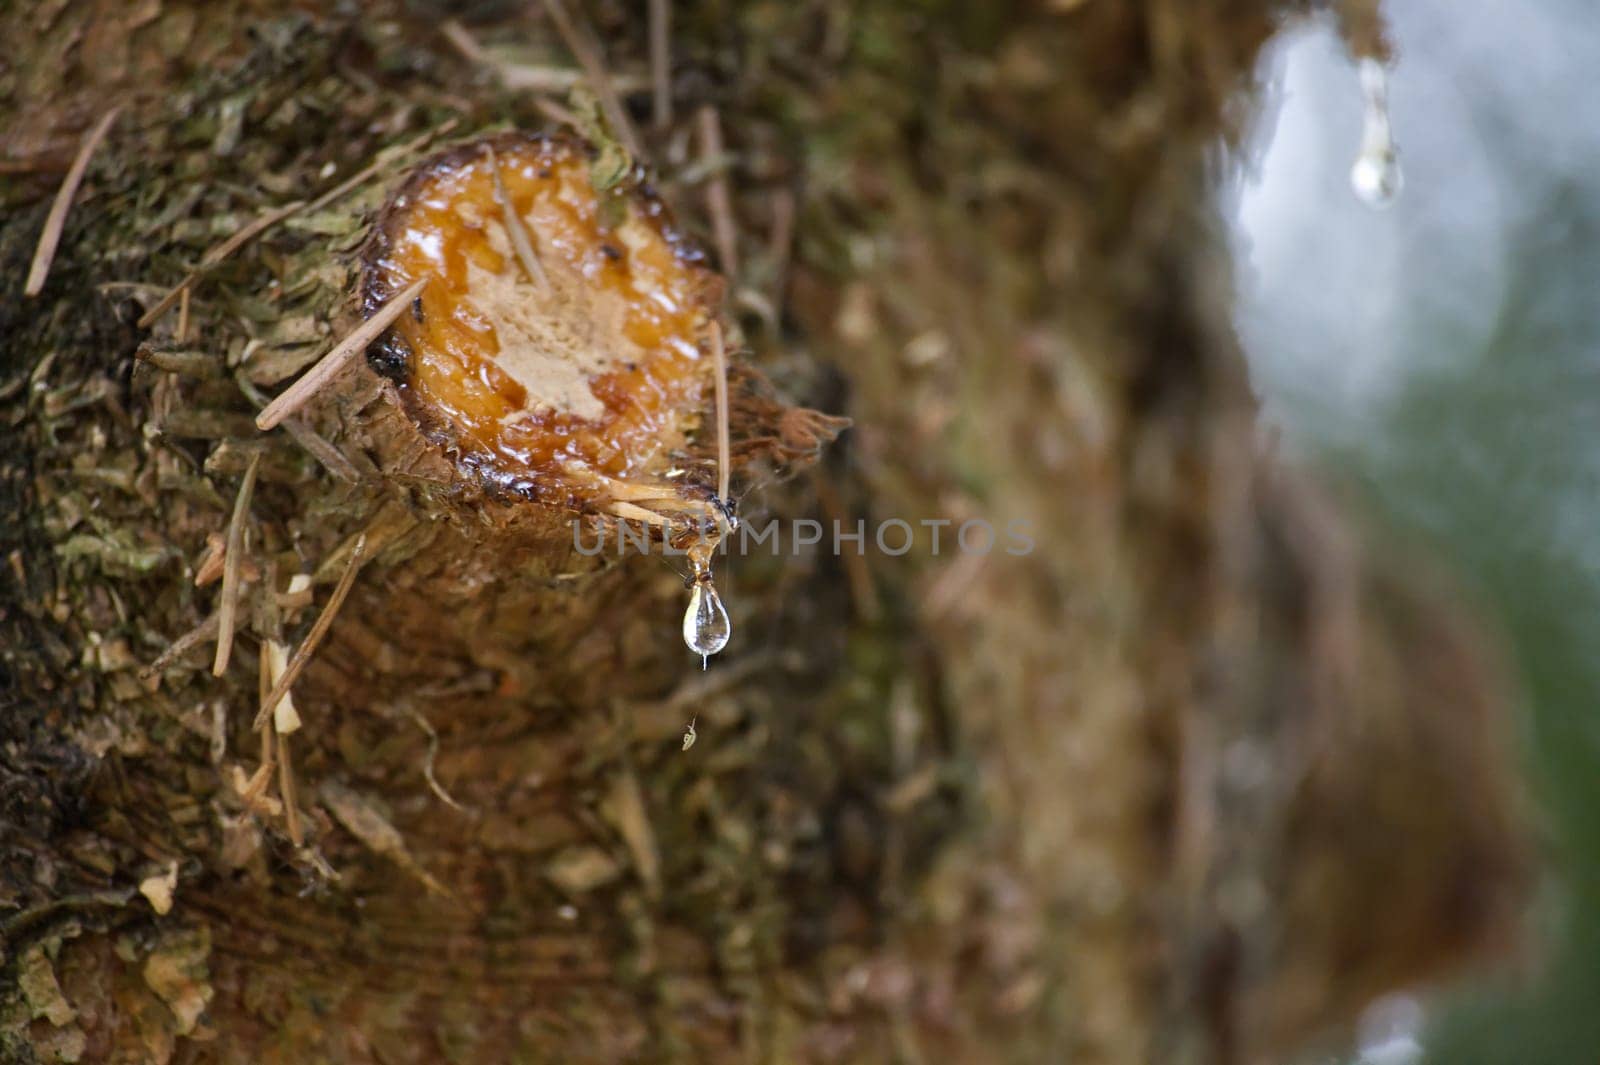 Drop of resin flows from a freshly cut spruce branch by NetPix